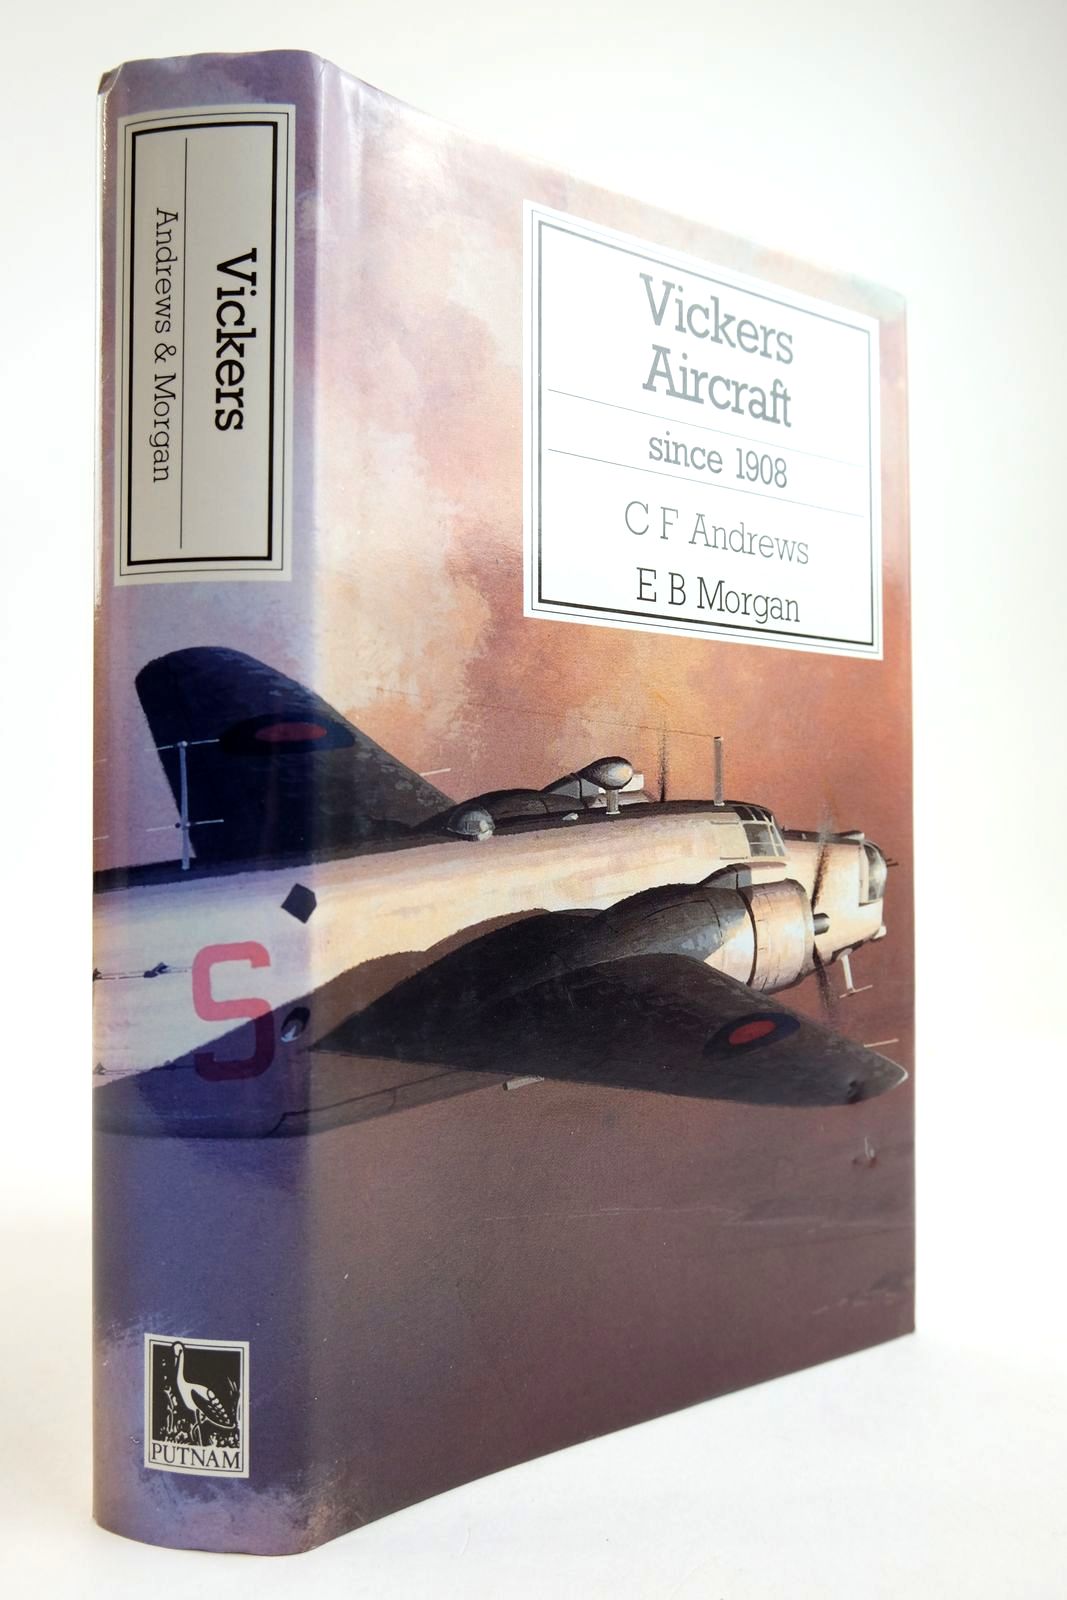 Photo of VICKERS AIRCRAFT SINCE 1908 written by Andrews, C.F. Morgan, Eric B. published by Putnam (STOCK CODE: 2134093)  for sale by Stella & Rose's Books